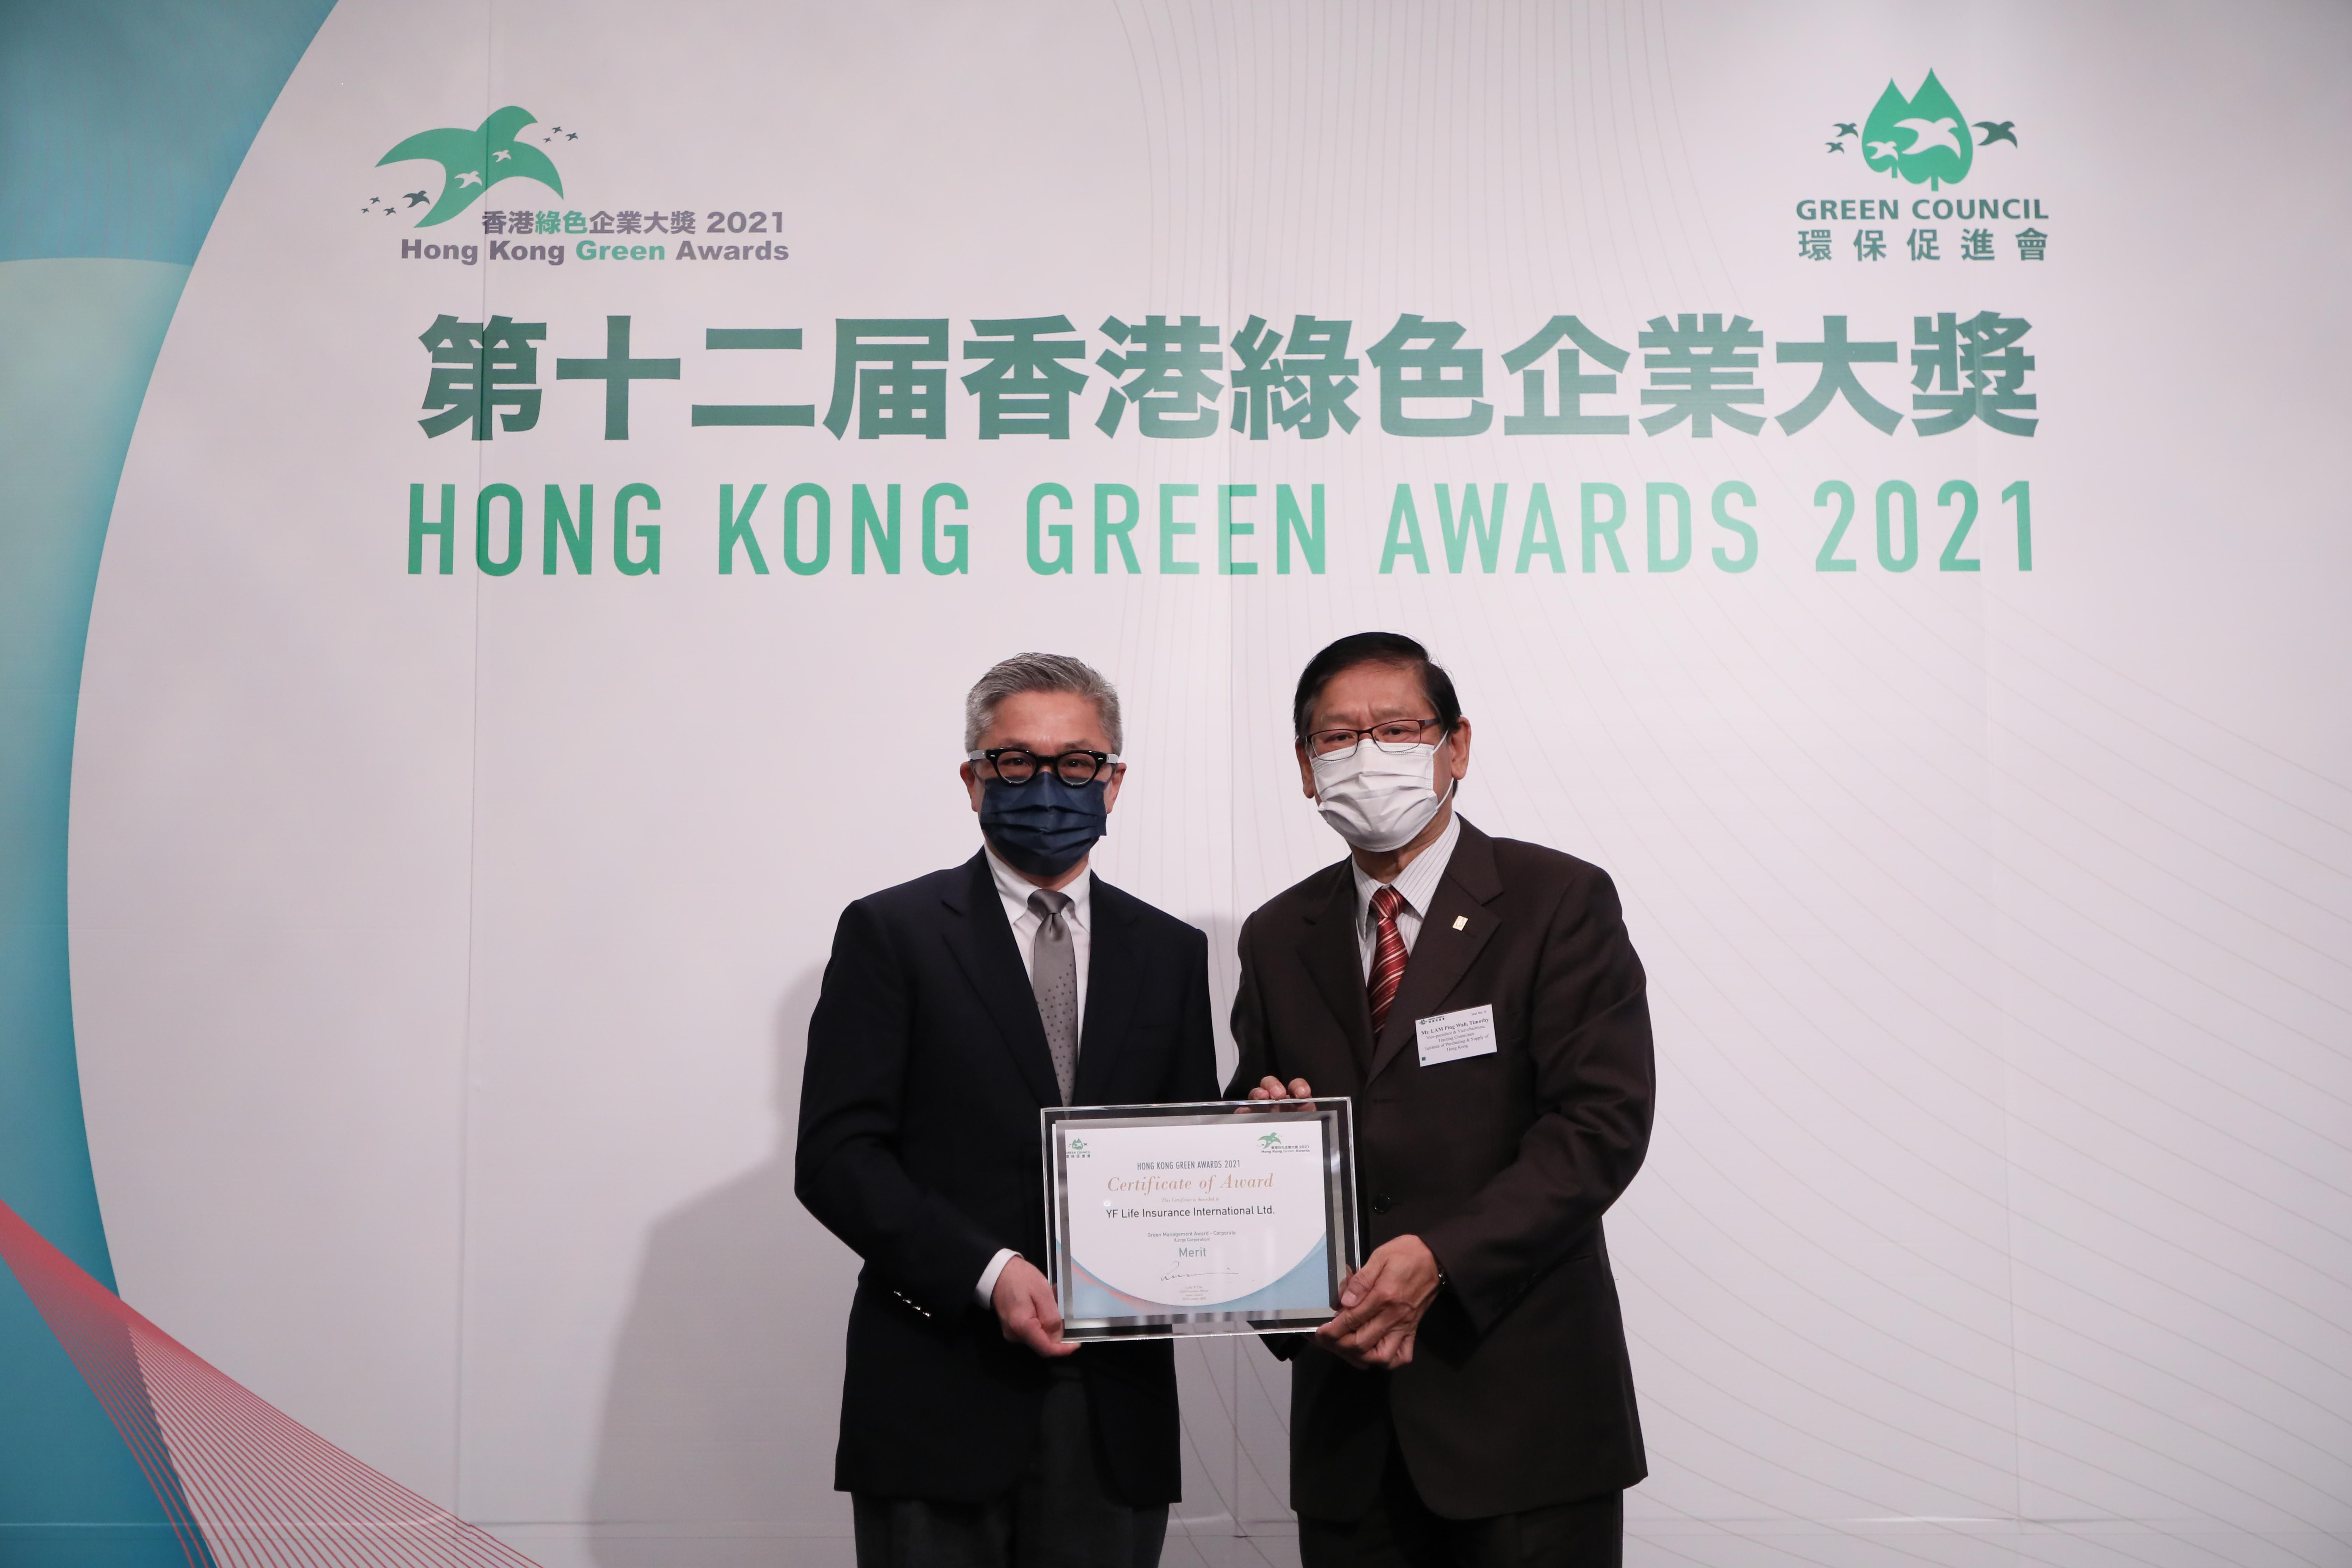 Mr. Peter Yip, Deputy Head of Innovation and Brand Marketing, at YF Life (left), accepts the “Green Management Award - Corporate (Large Corporation) - Merit” at the “Hong Kong Green Awards 2021” presentation ceremony.